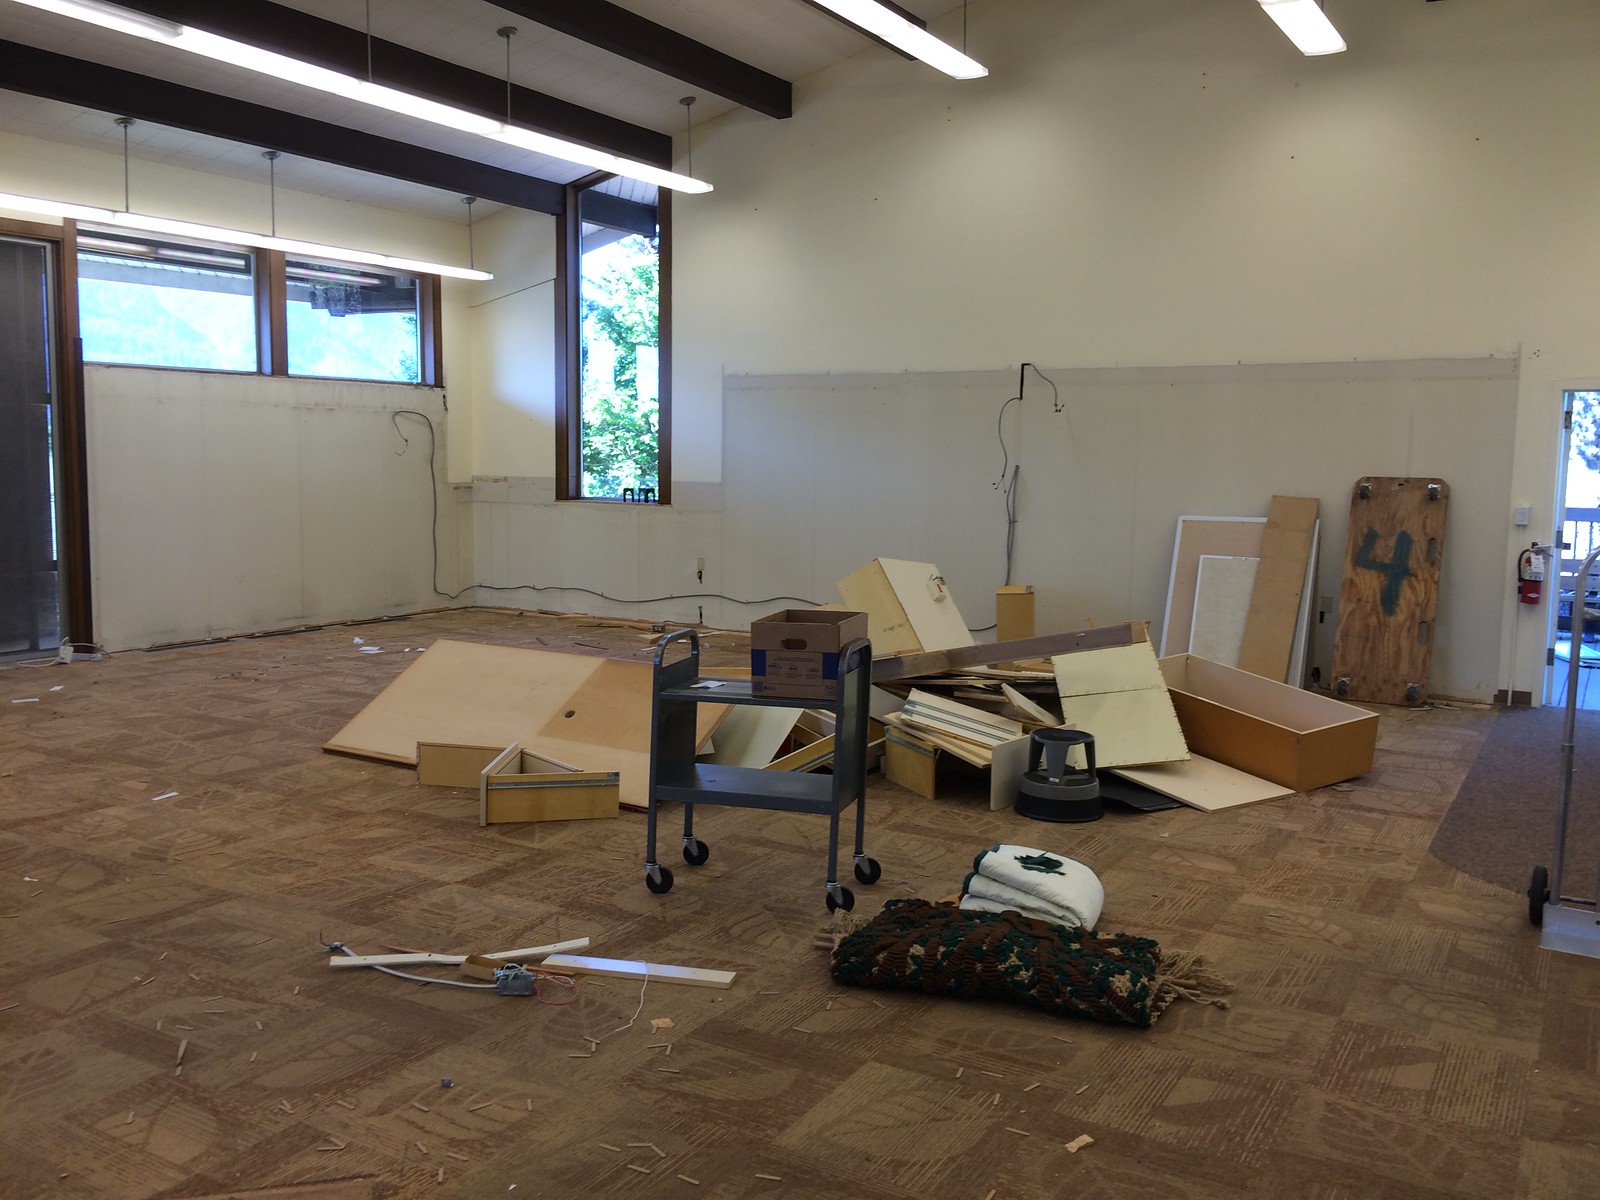 July 12--Looking west while emptying out the library interior